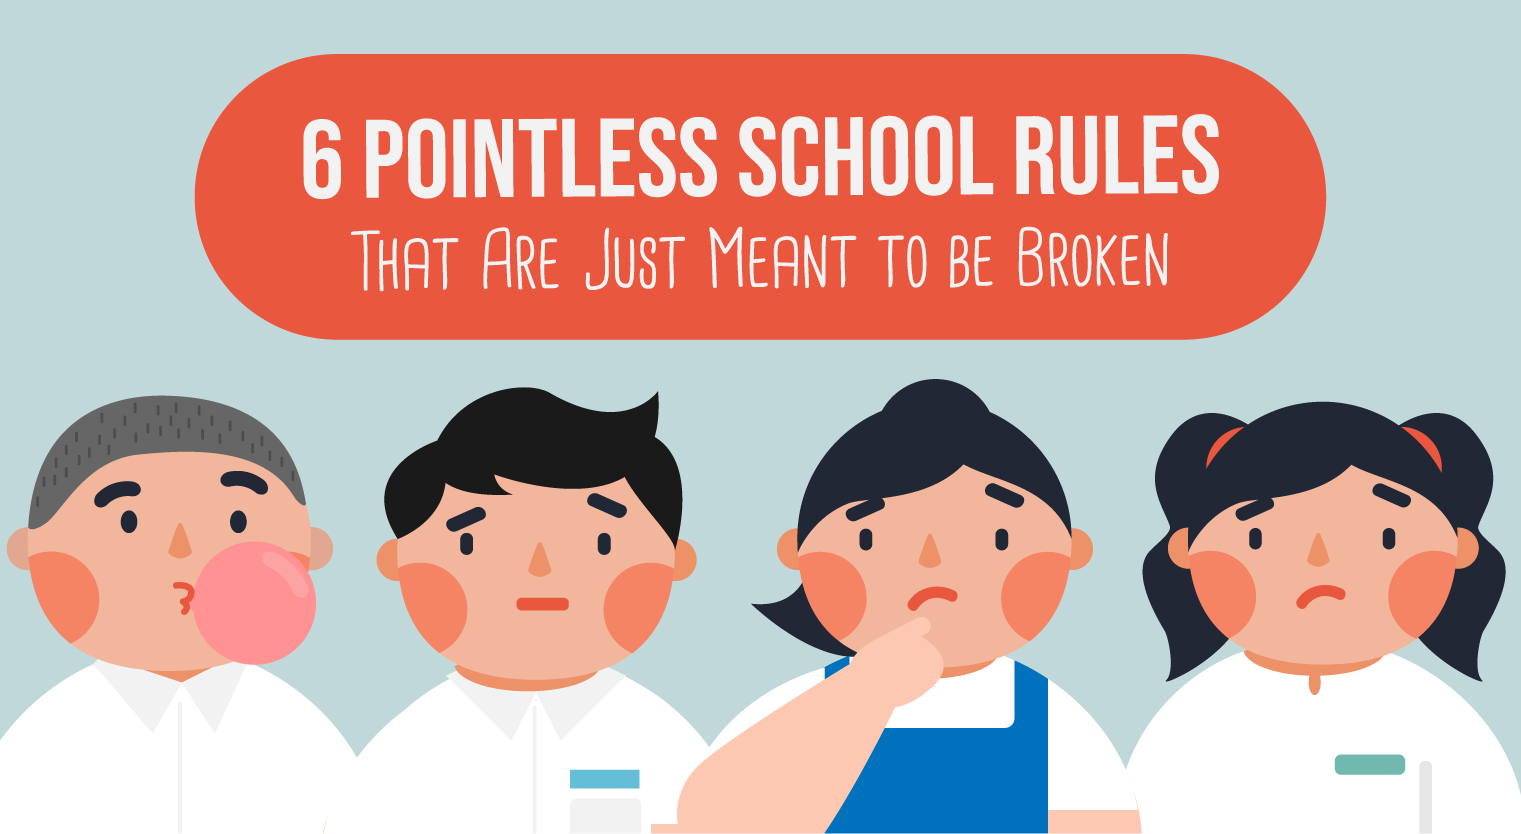 6 Pointless School Rules That Are Just Meant to be Broken - Feature-Image